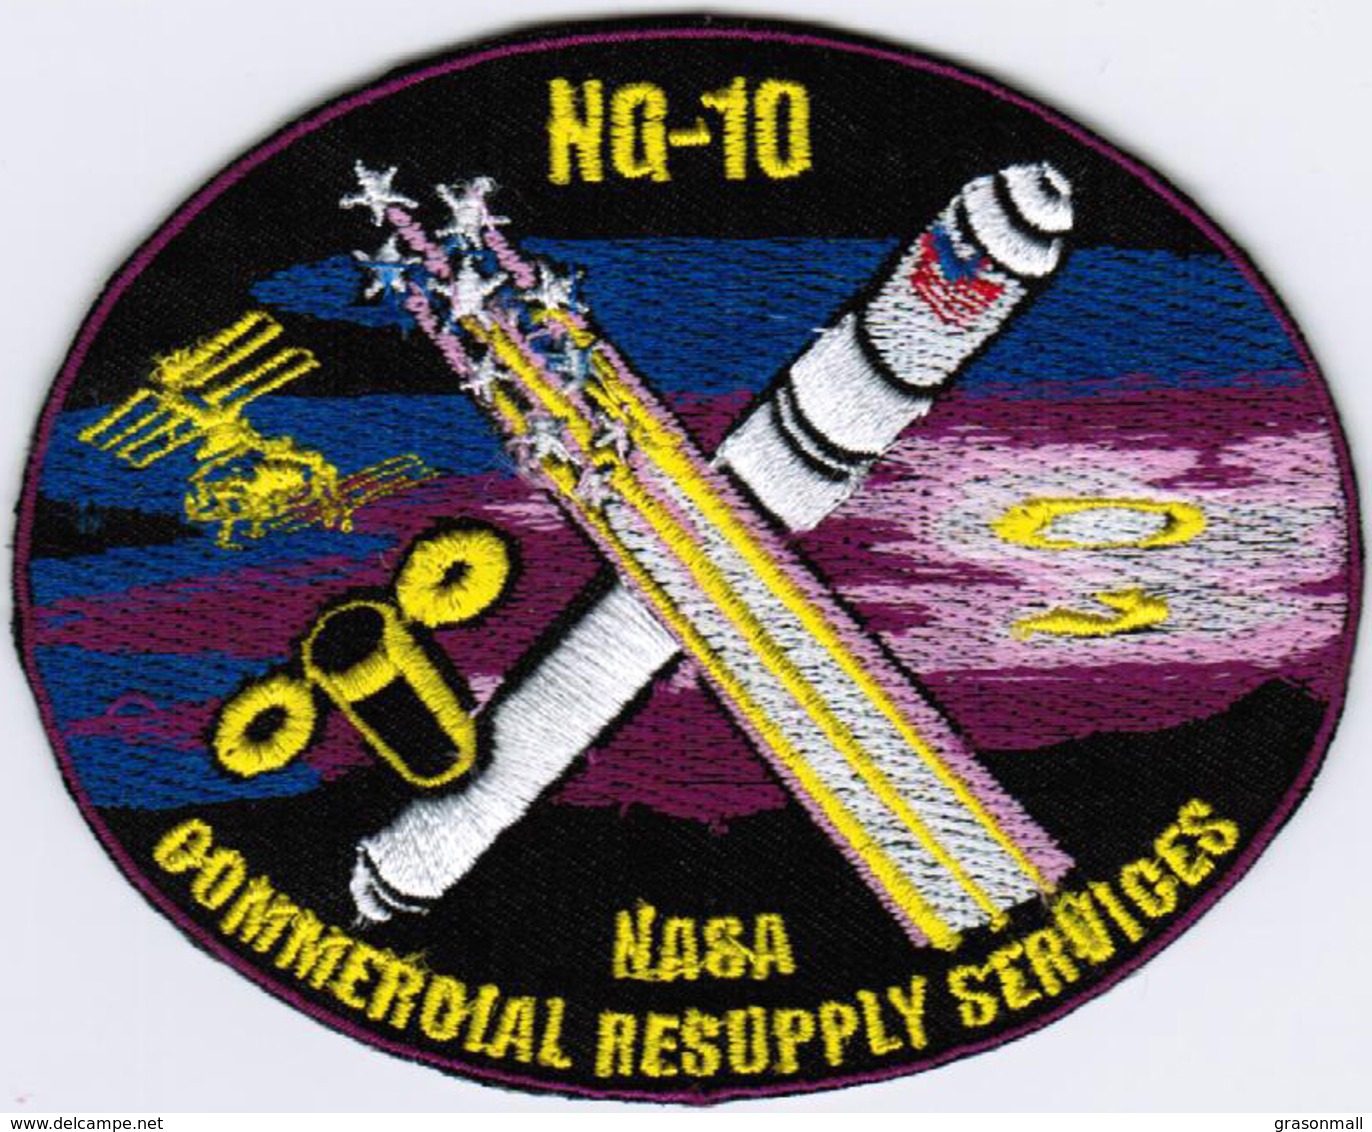 ISS Expedition 57 Cygnus NG-10 Nasa International Space Station Embroidered Patch - Patches